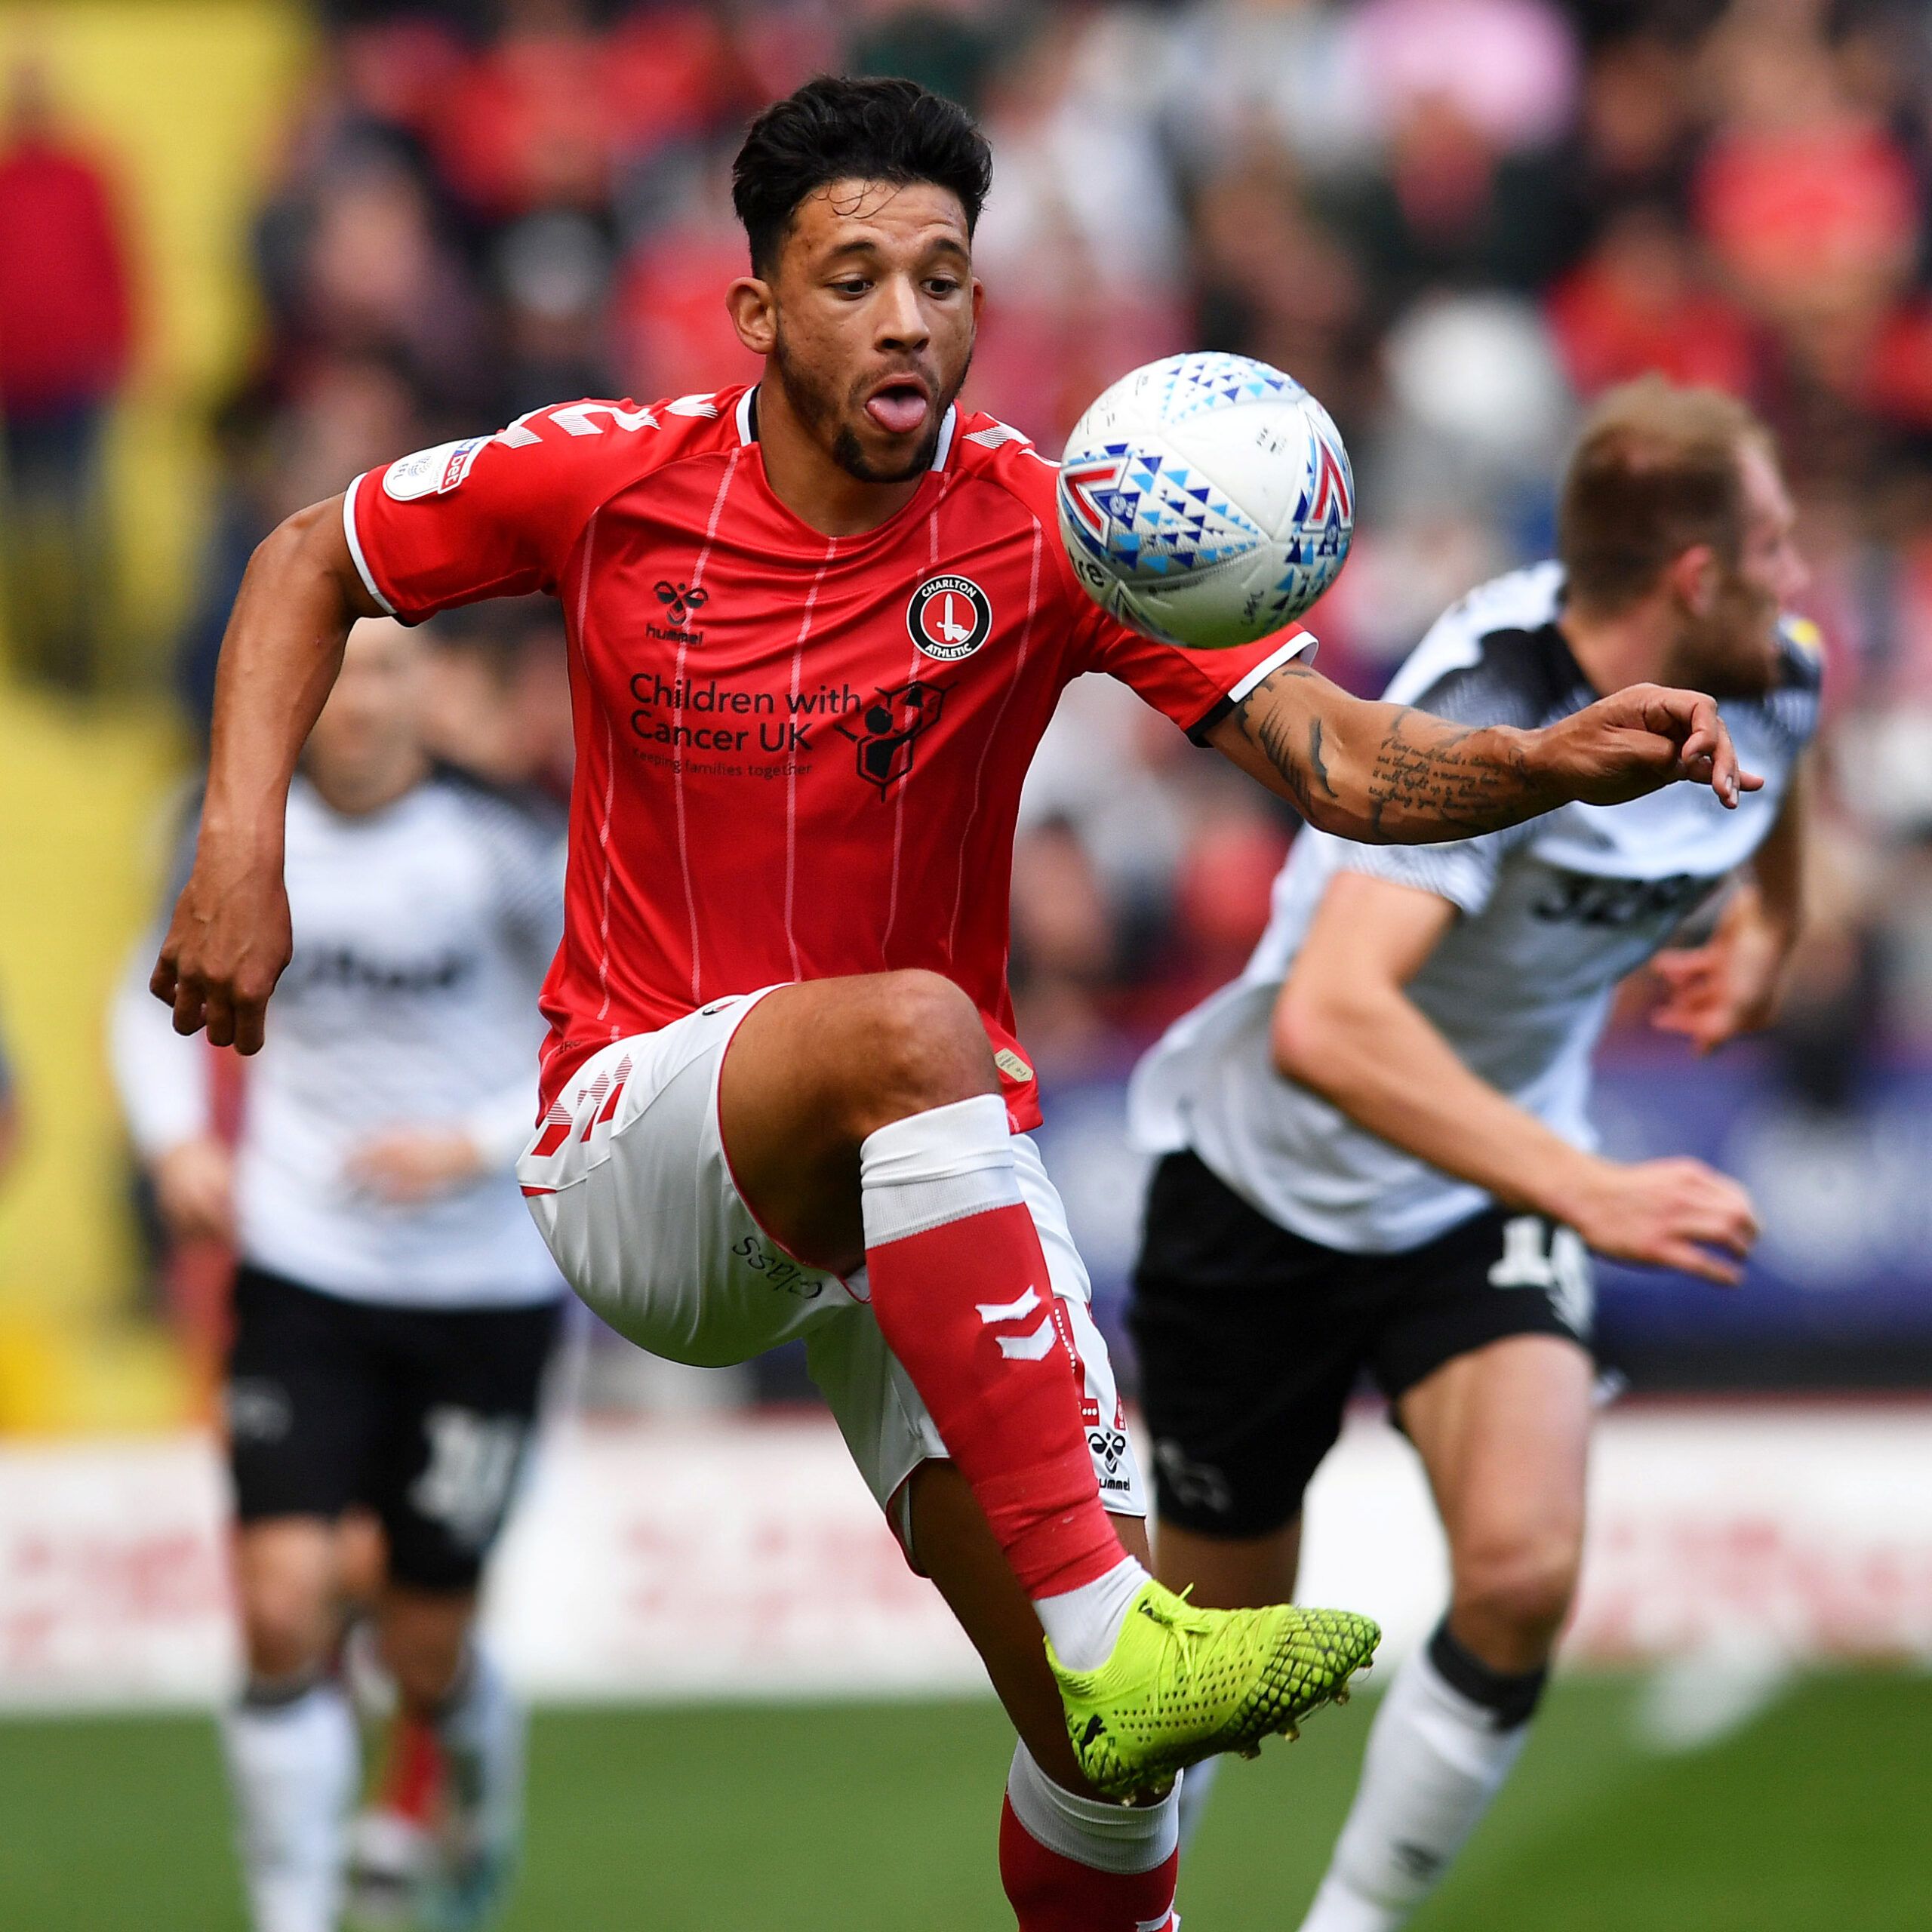 Soccer Football - Championship - Charlton Athletic v Derby County - The Valley, London, Britain - October 19, 2019   Charlton's Macauley Bonne in action   Action Images/Alan Walter    EDITORIAL USE ONLY. No use with unauthorized audio, video, data, fixture lists, club/league logos or 